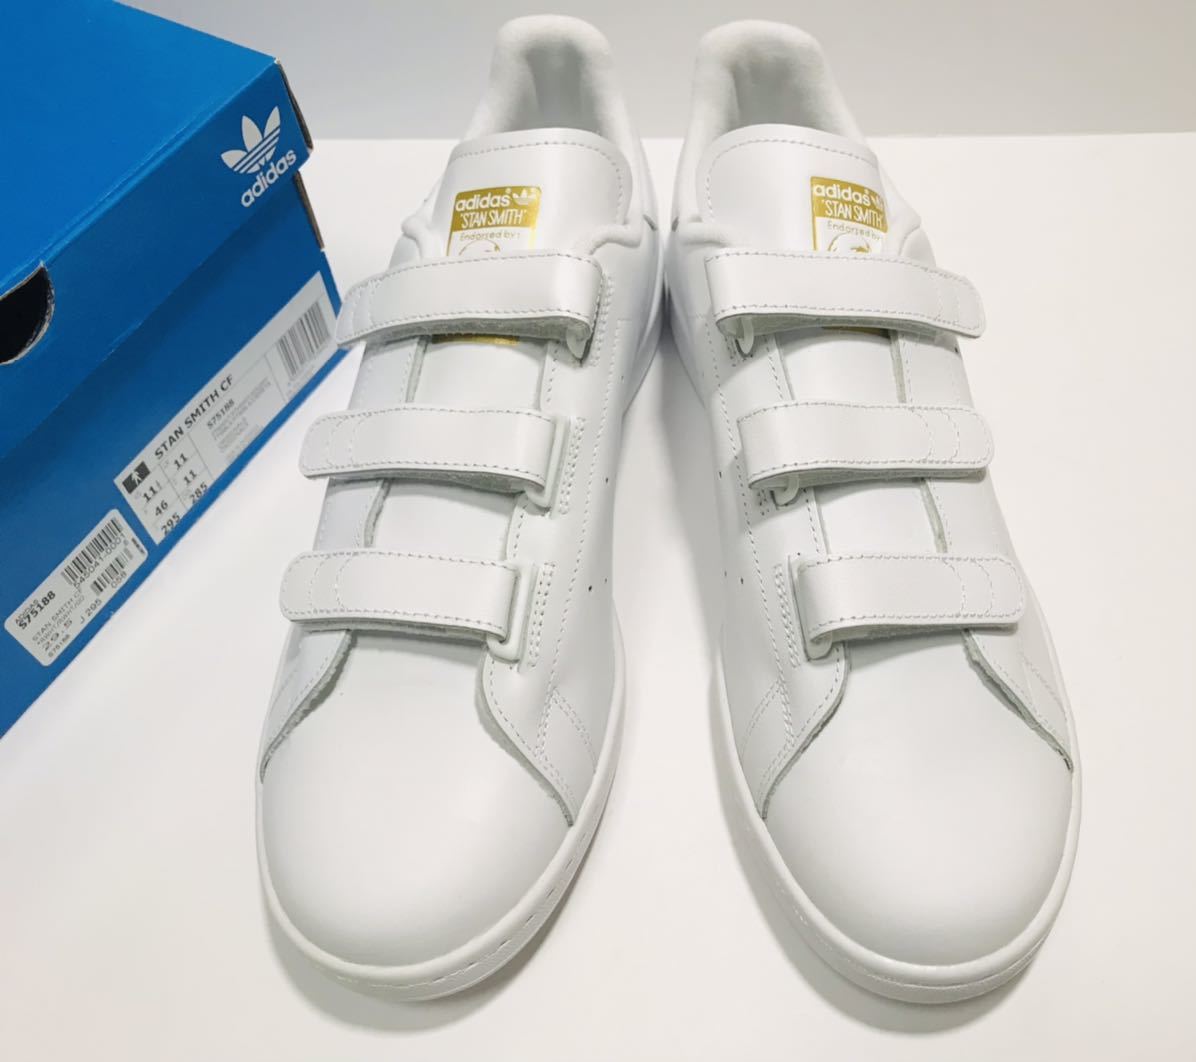  unused!! dead!! 2020 made adidas Adidas S75188 STAN SMITH CF Stansmith velcro white x gold 29.5cm US 11.5 box attaching natural leather original leather 